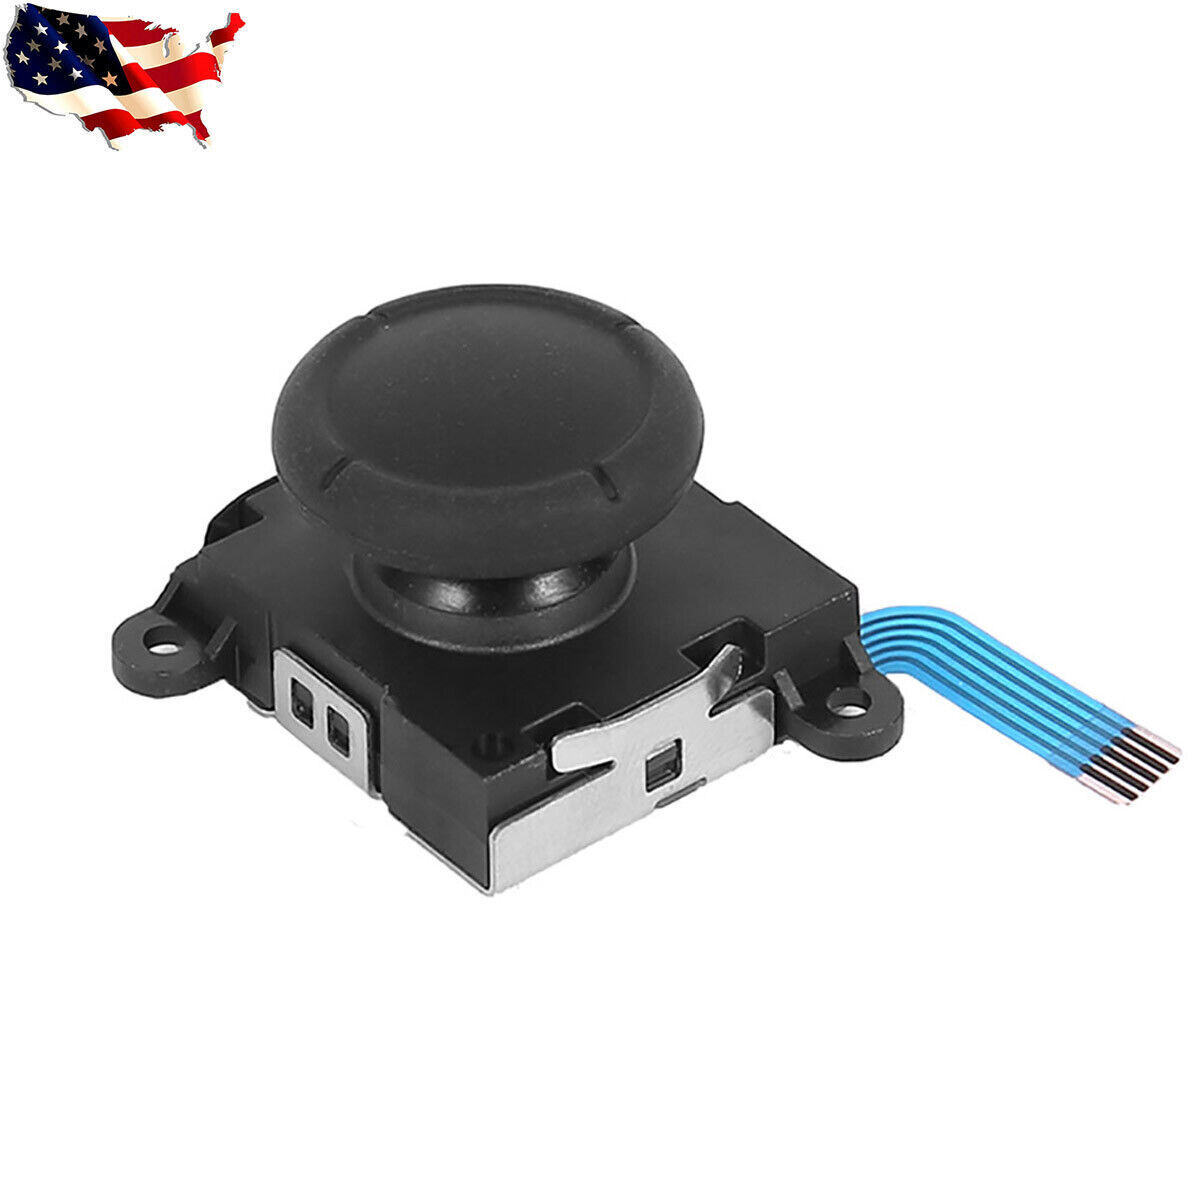 OEM Analog Joystick Thumbstick Replacement For Nintendo Switch JoyCon Controller